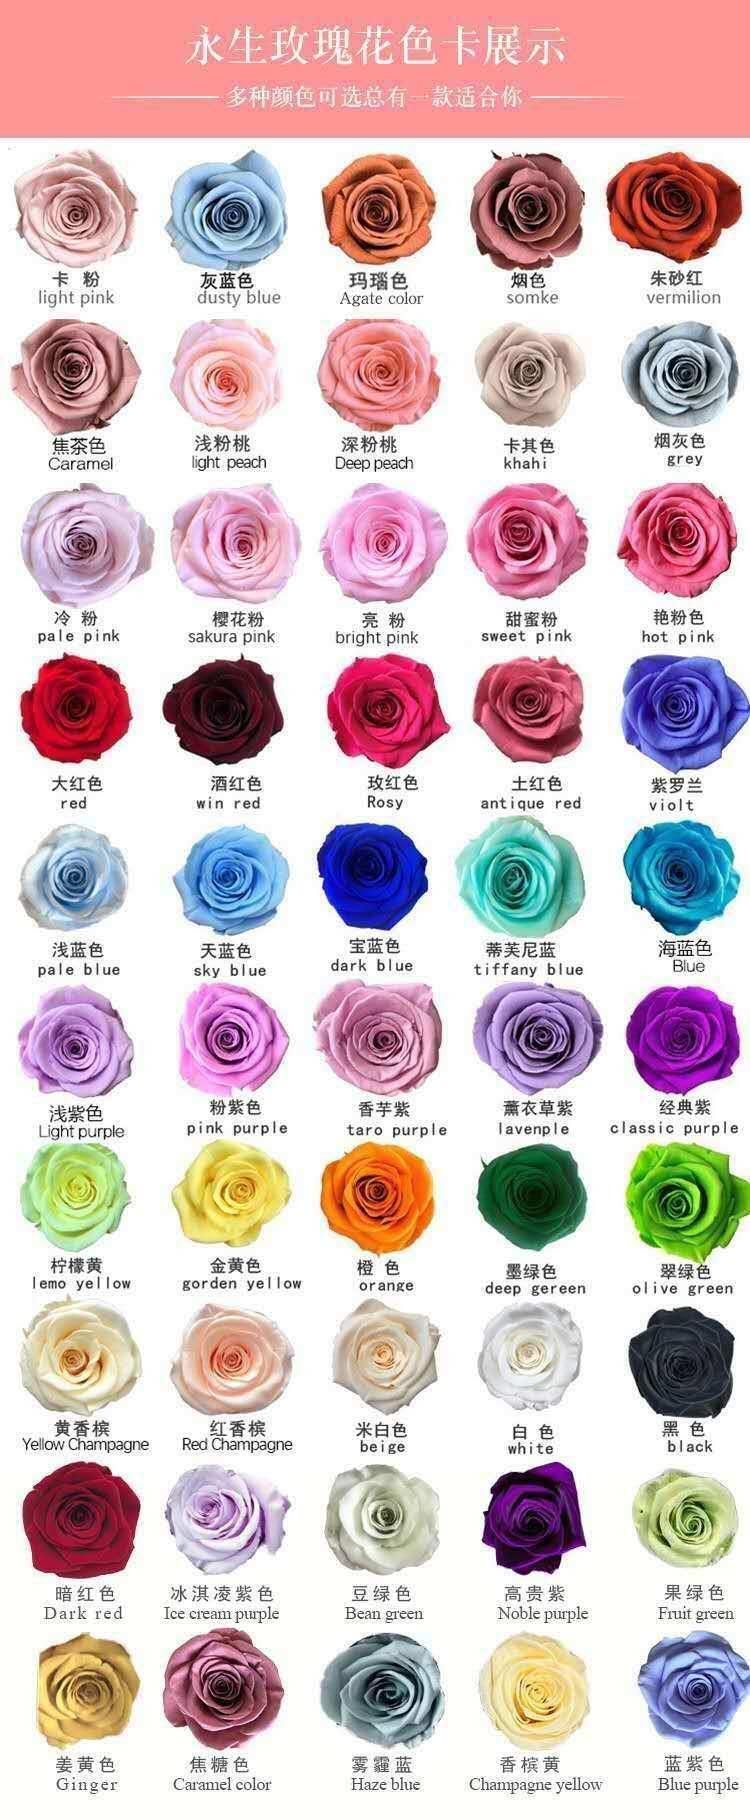 Amazon Hotsale Preserved Roses Long Lasting Valentine′s Day Gifts Christmas Day Gift for Her Girl Friend Mom